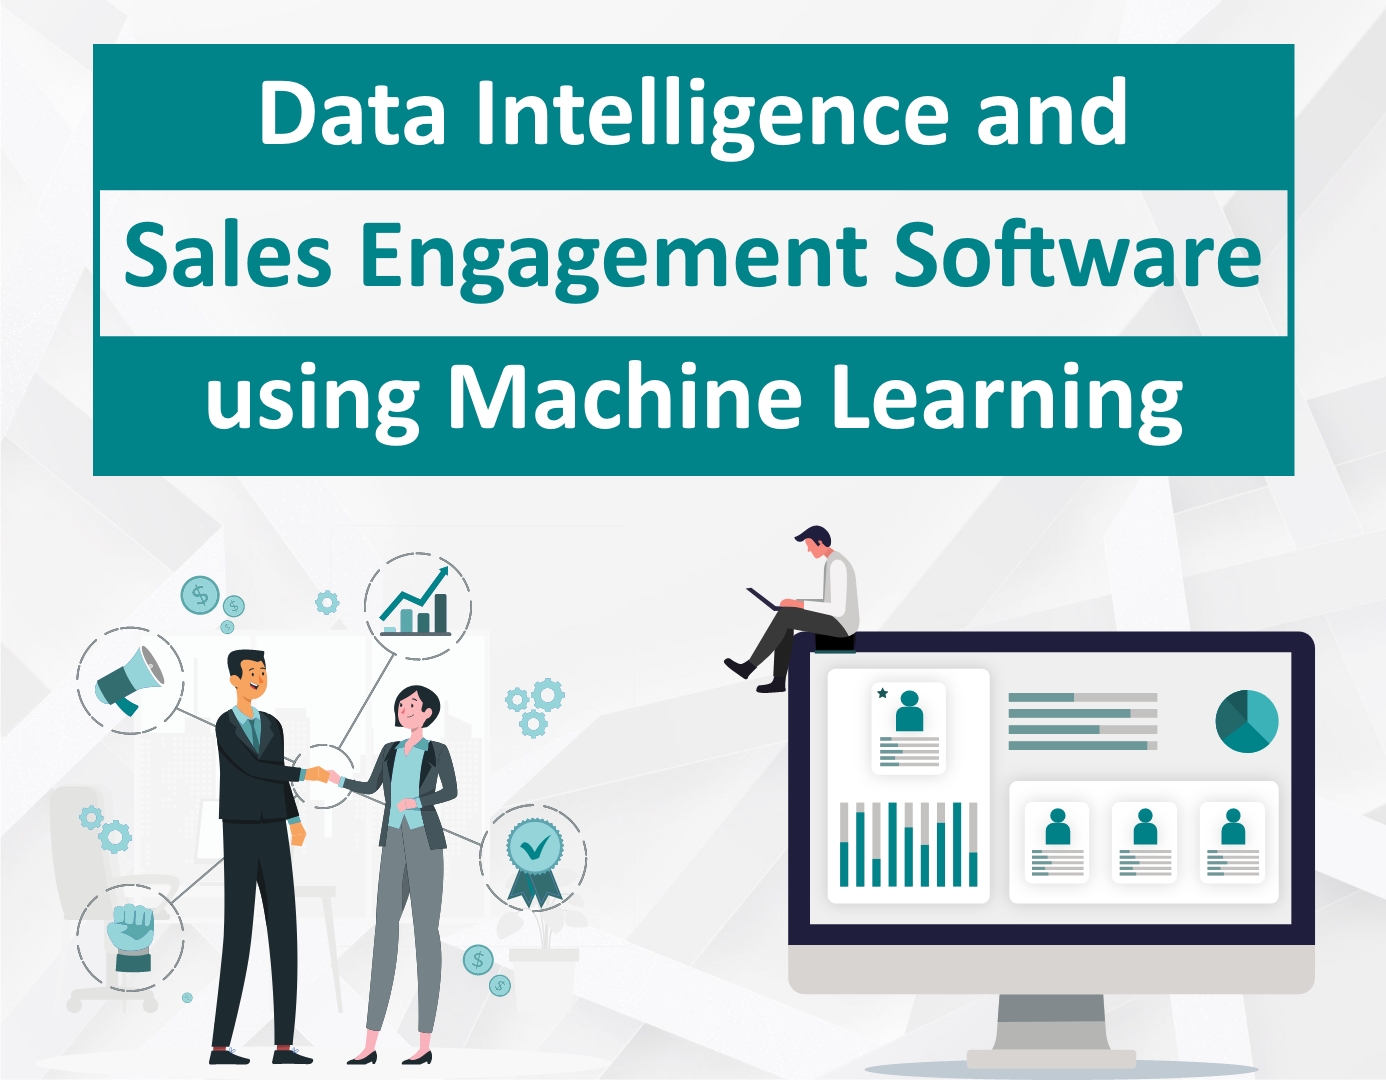 Data Intelligence and sales engagement software using machine learning